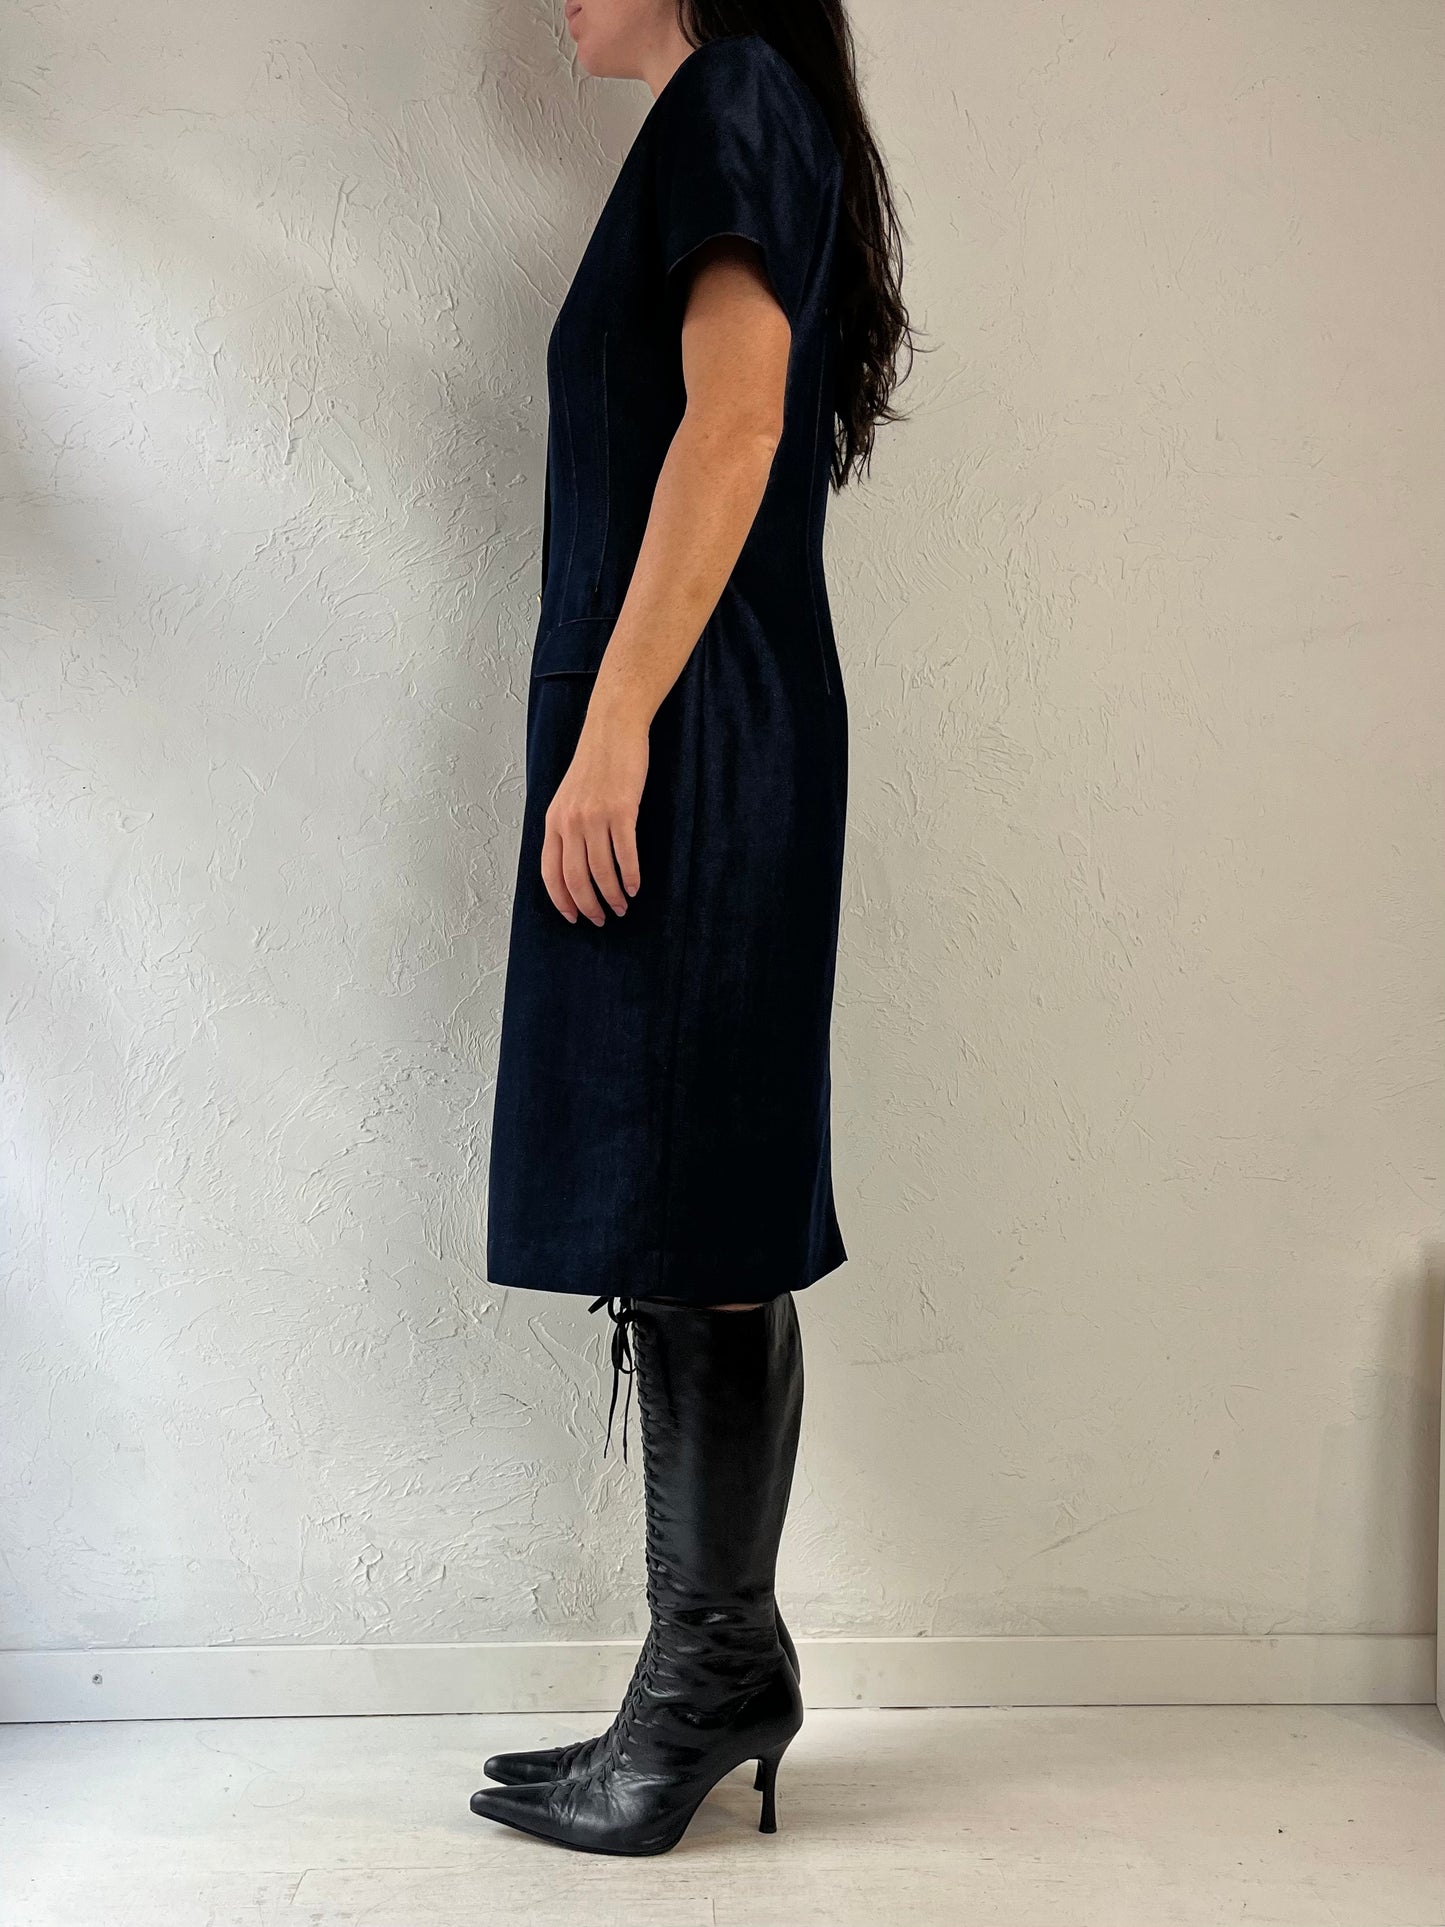 90s 'Saks Fifth Ave' Navy Blue Button Up Collared  Dress / Medium